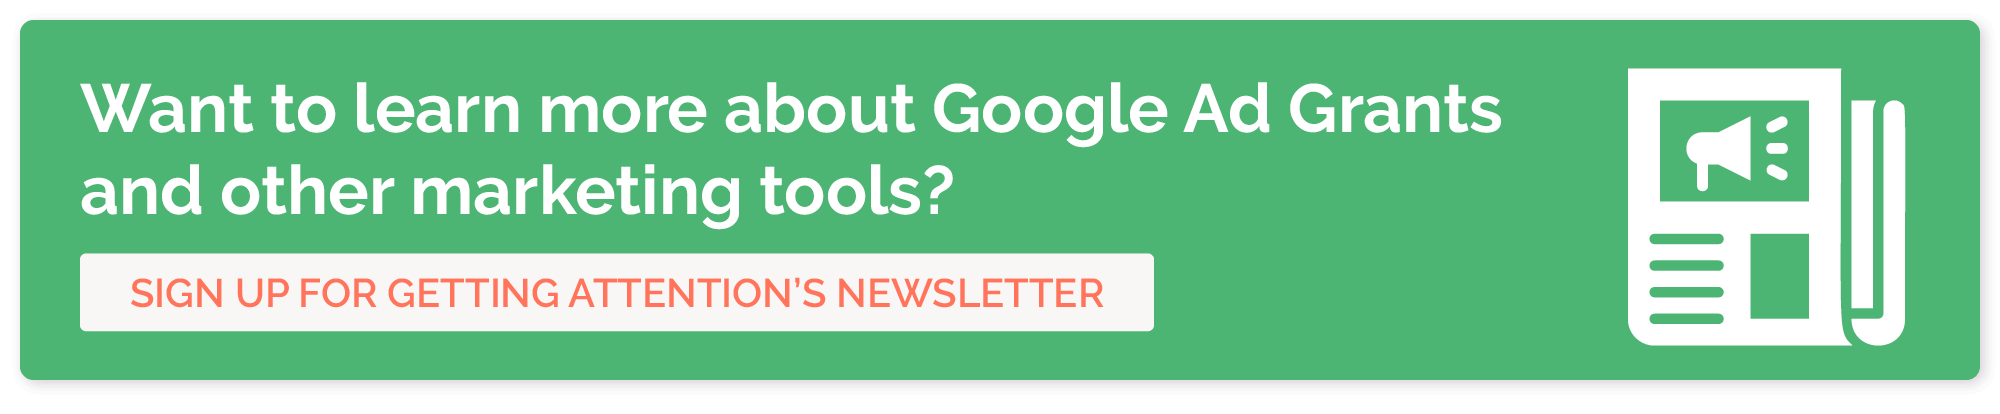 Sign up for Getting Attention’s newsletter to learn more about Google Ad Grants and other nonprofit marketing tools.